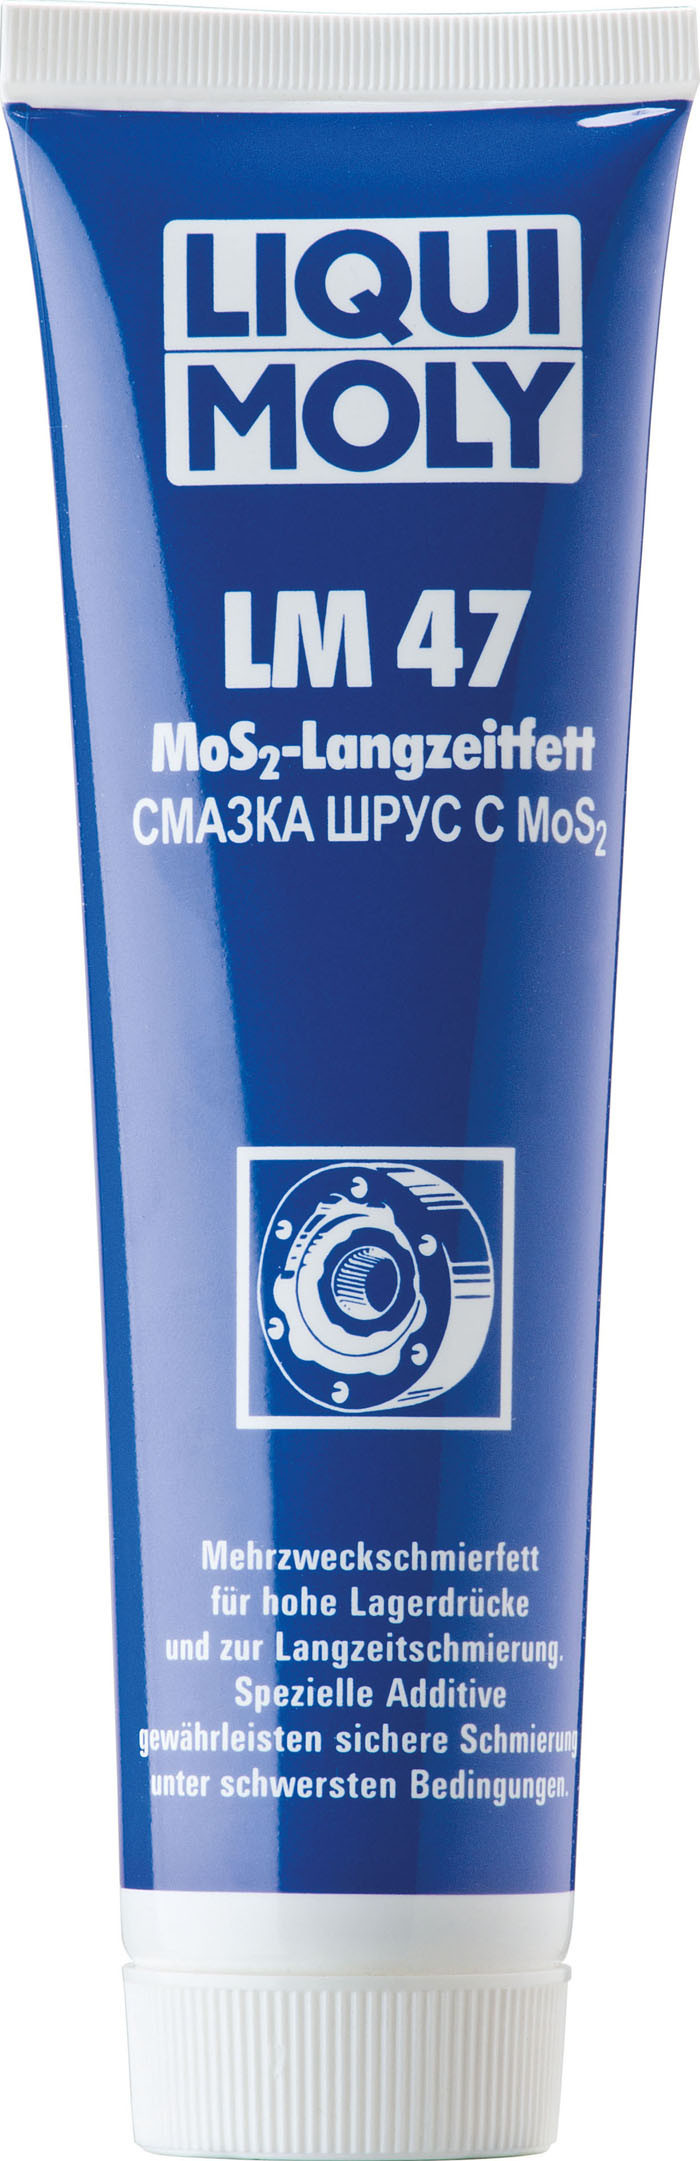 LM Смазка шрус MoS2 LM 47 0,1л (уп.12)